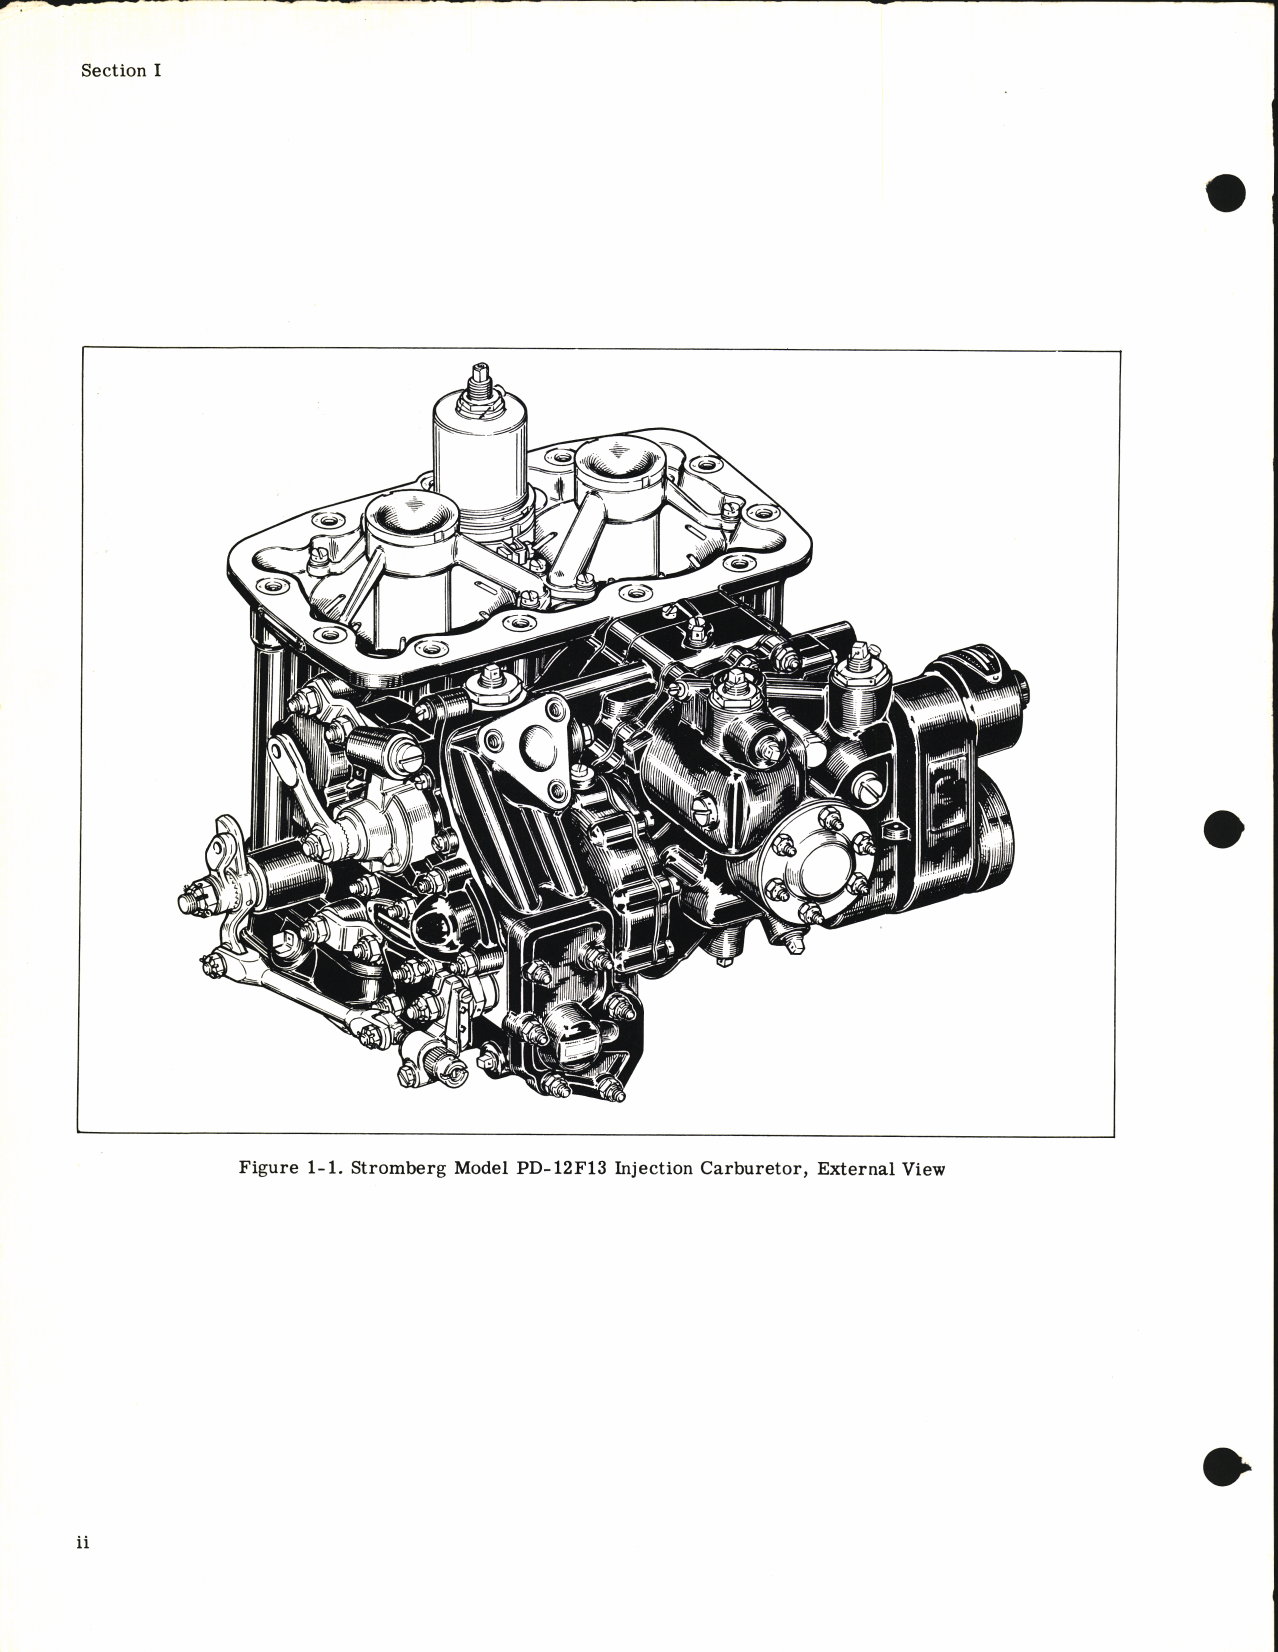 Sample page 8 from AirCorps Library document: Service Manual for Stromberg Injection Carburetor Model PD-12F13